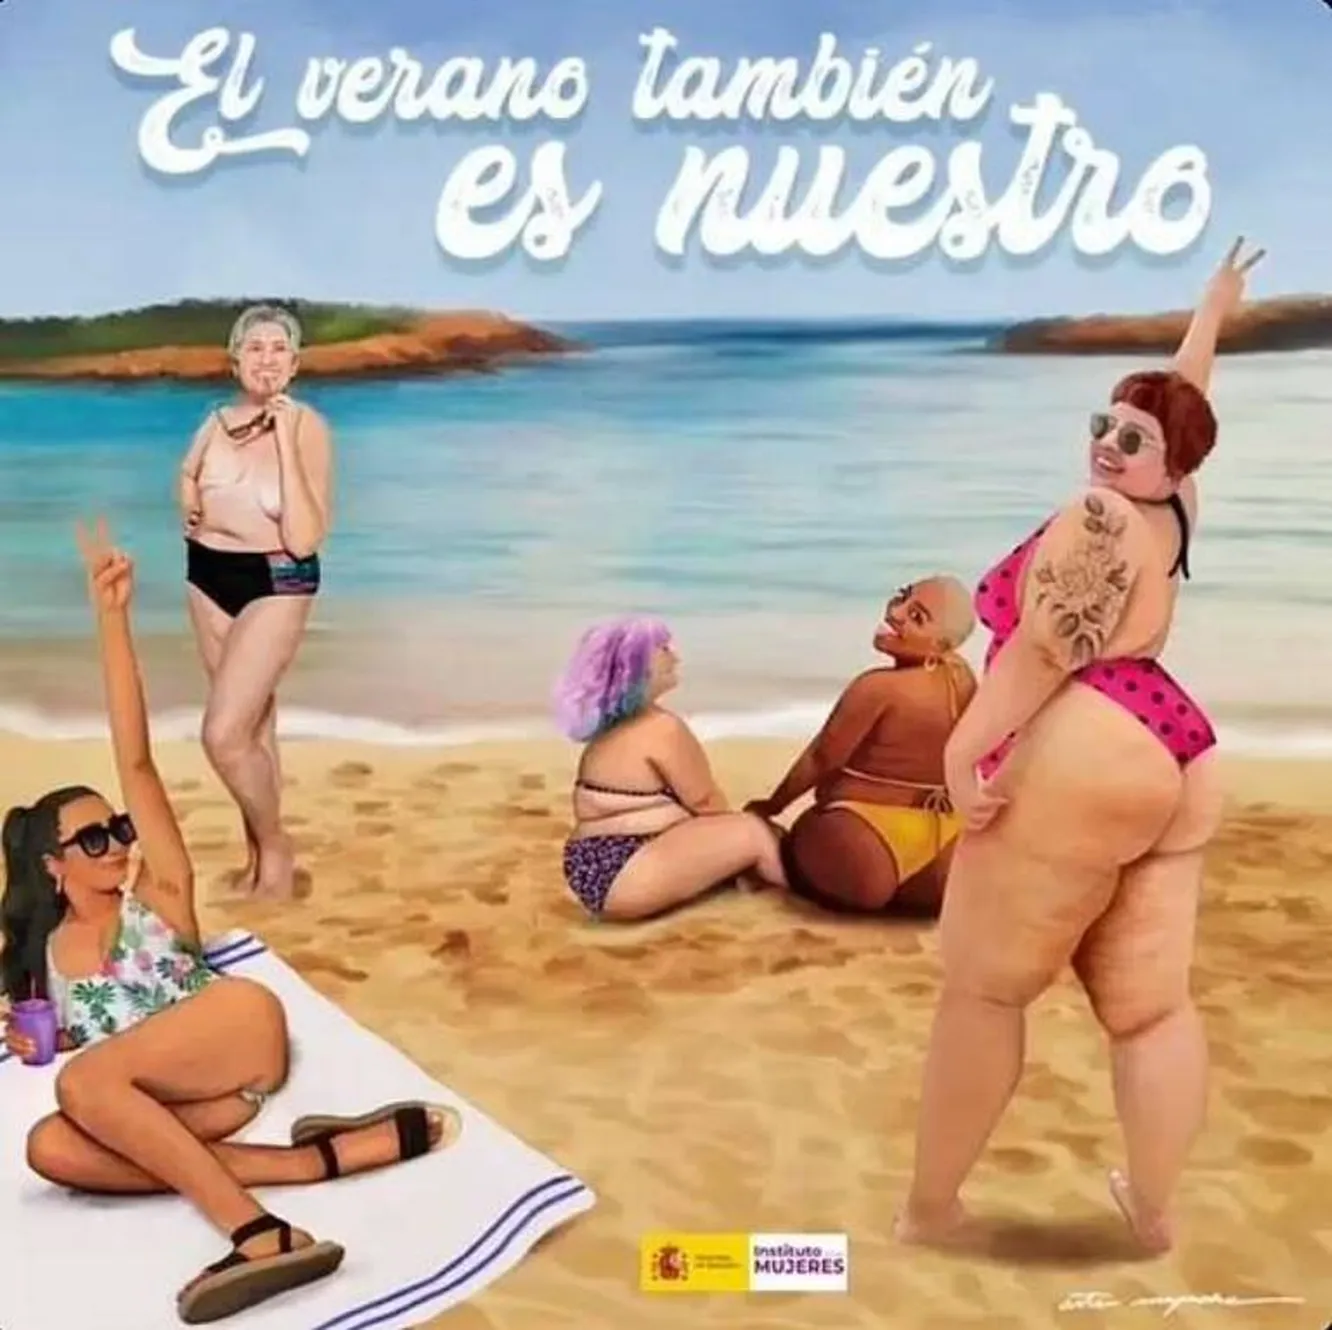 Spanish authorities ask girls to swim topless in public places